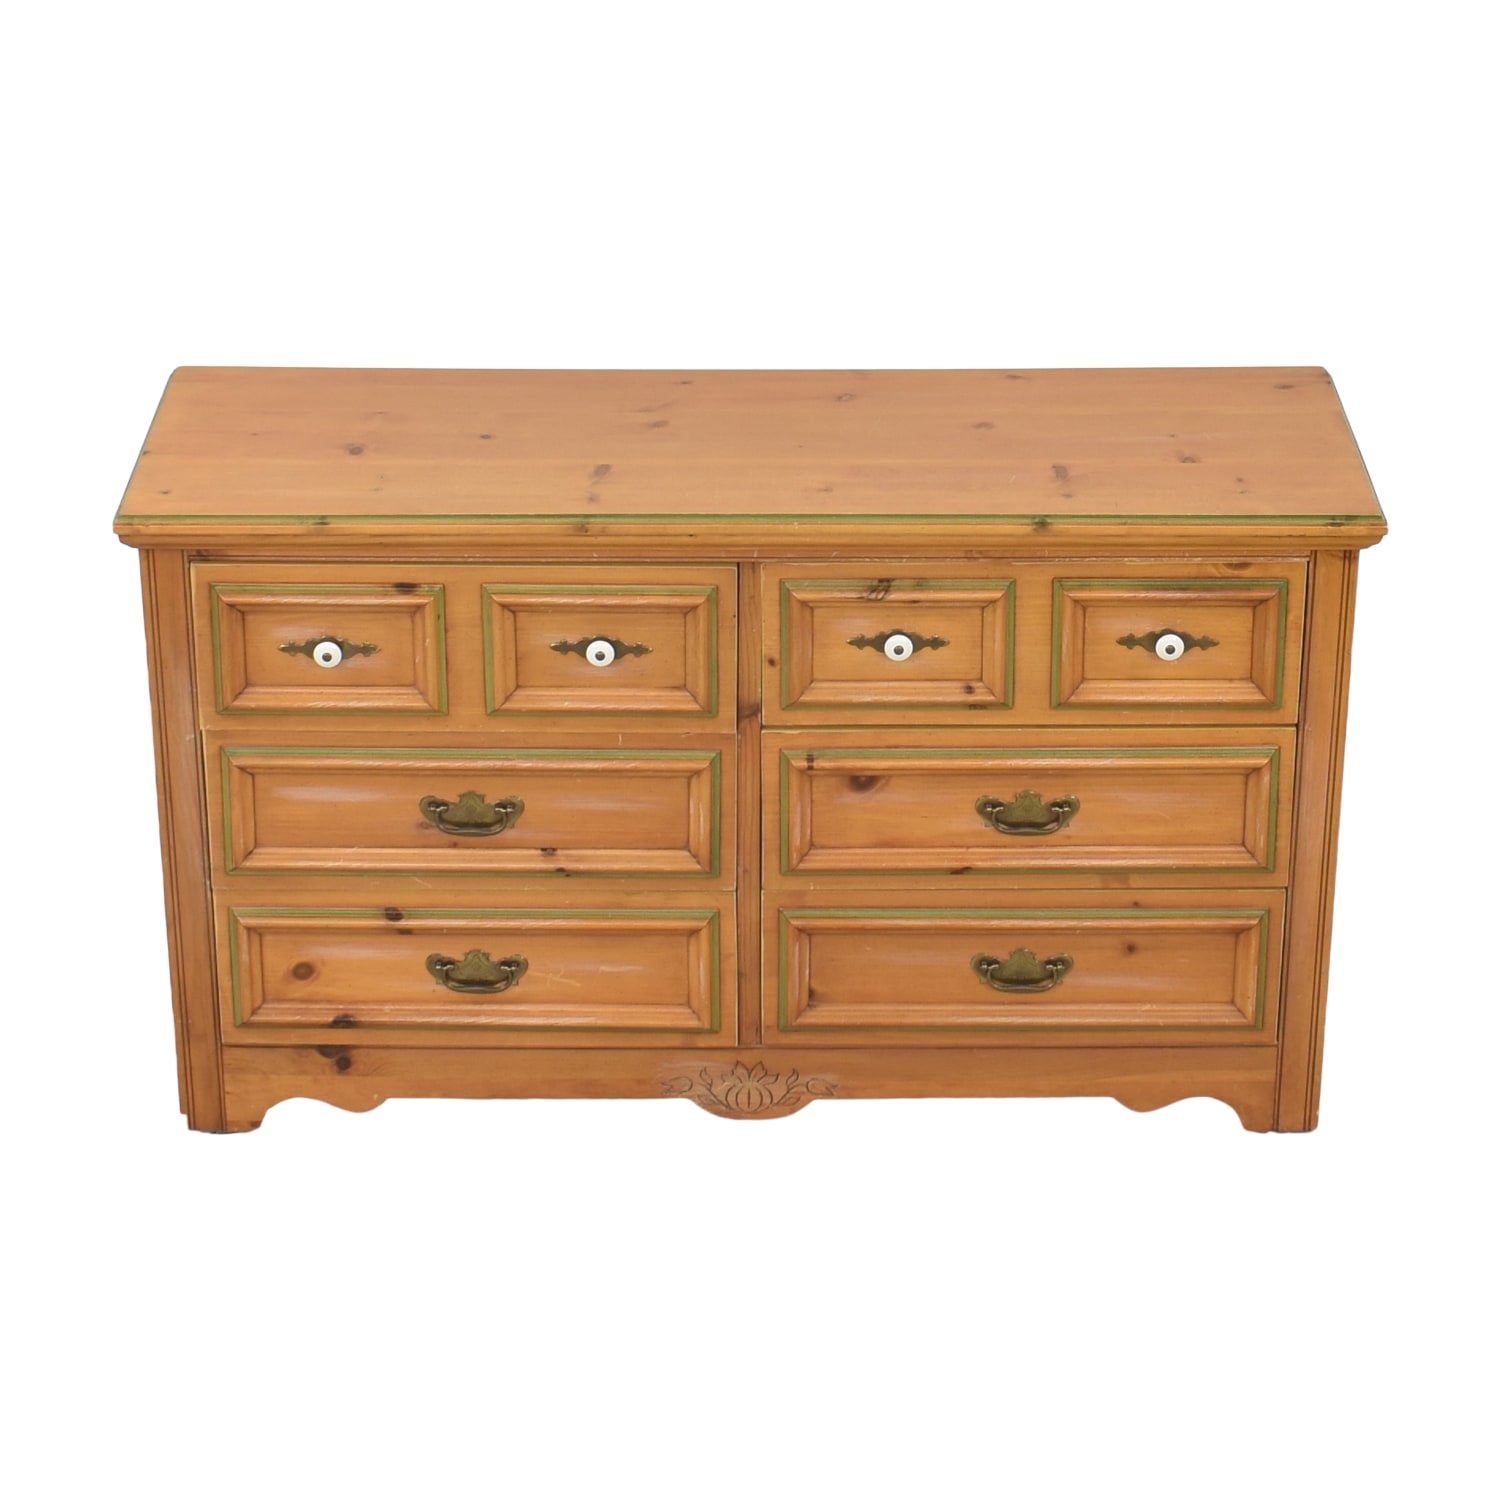 Young-Hinkle Cape Cod Dresser sale